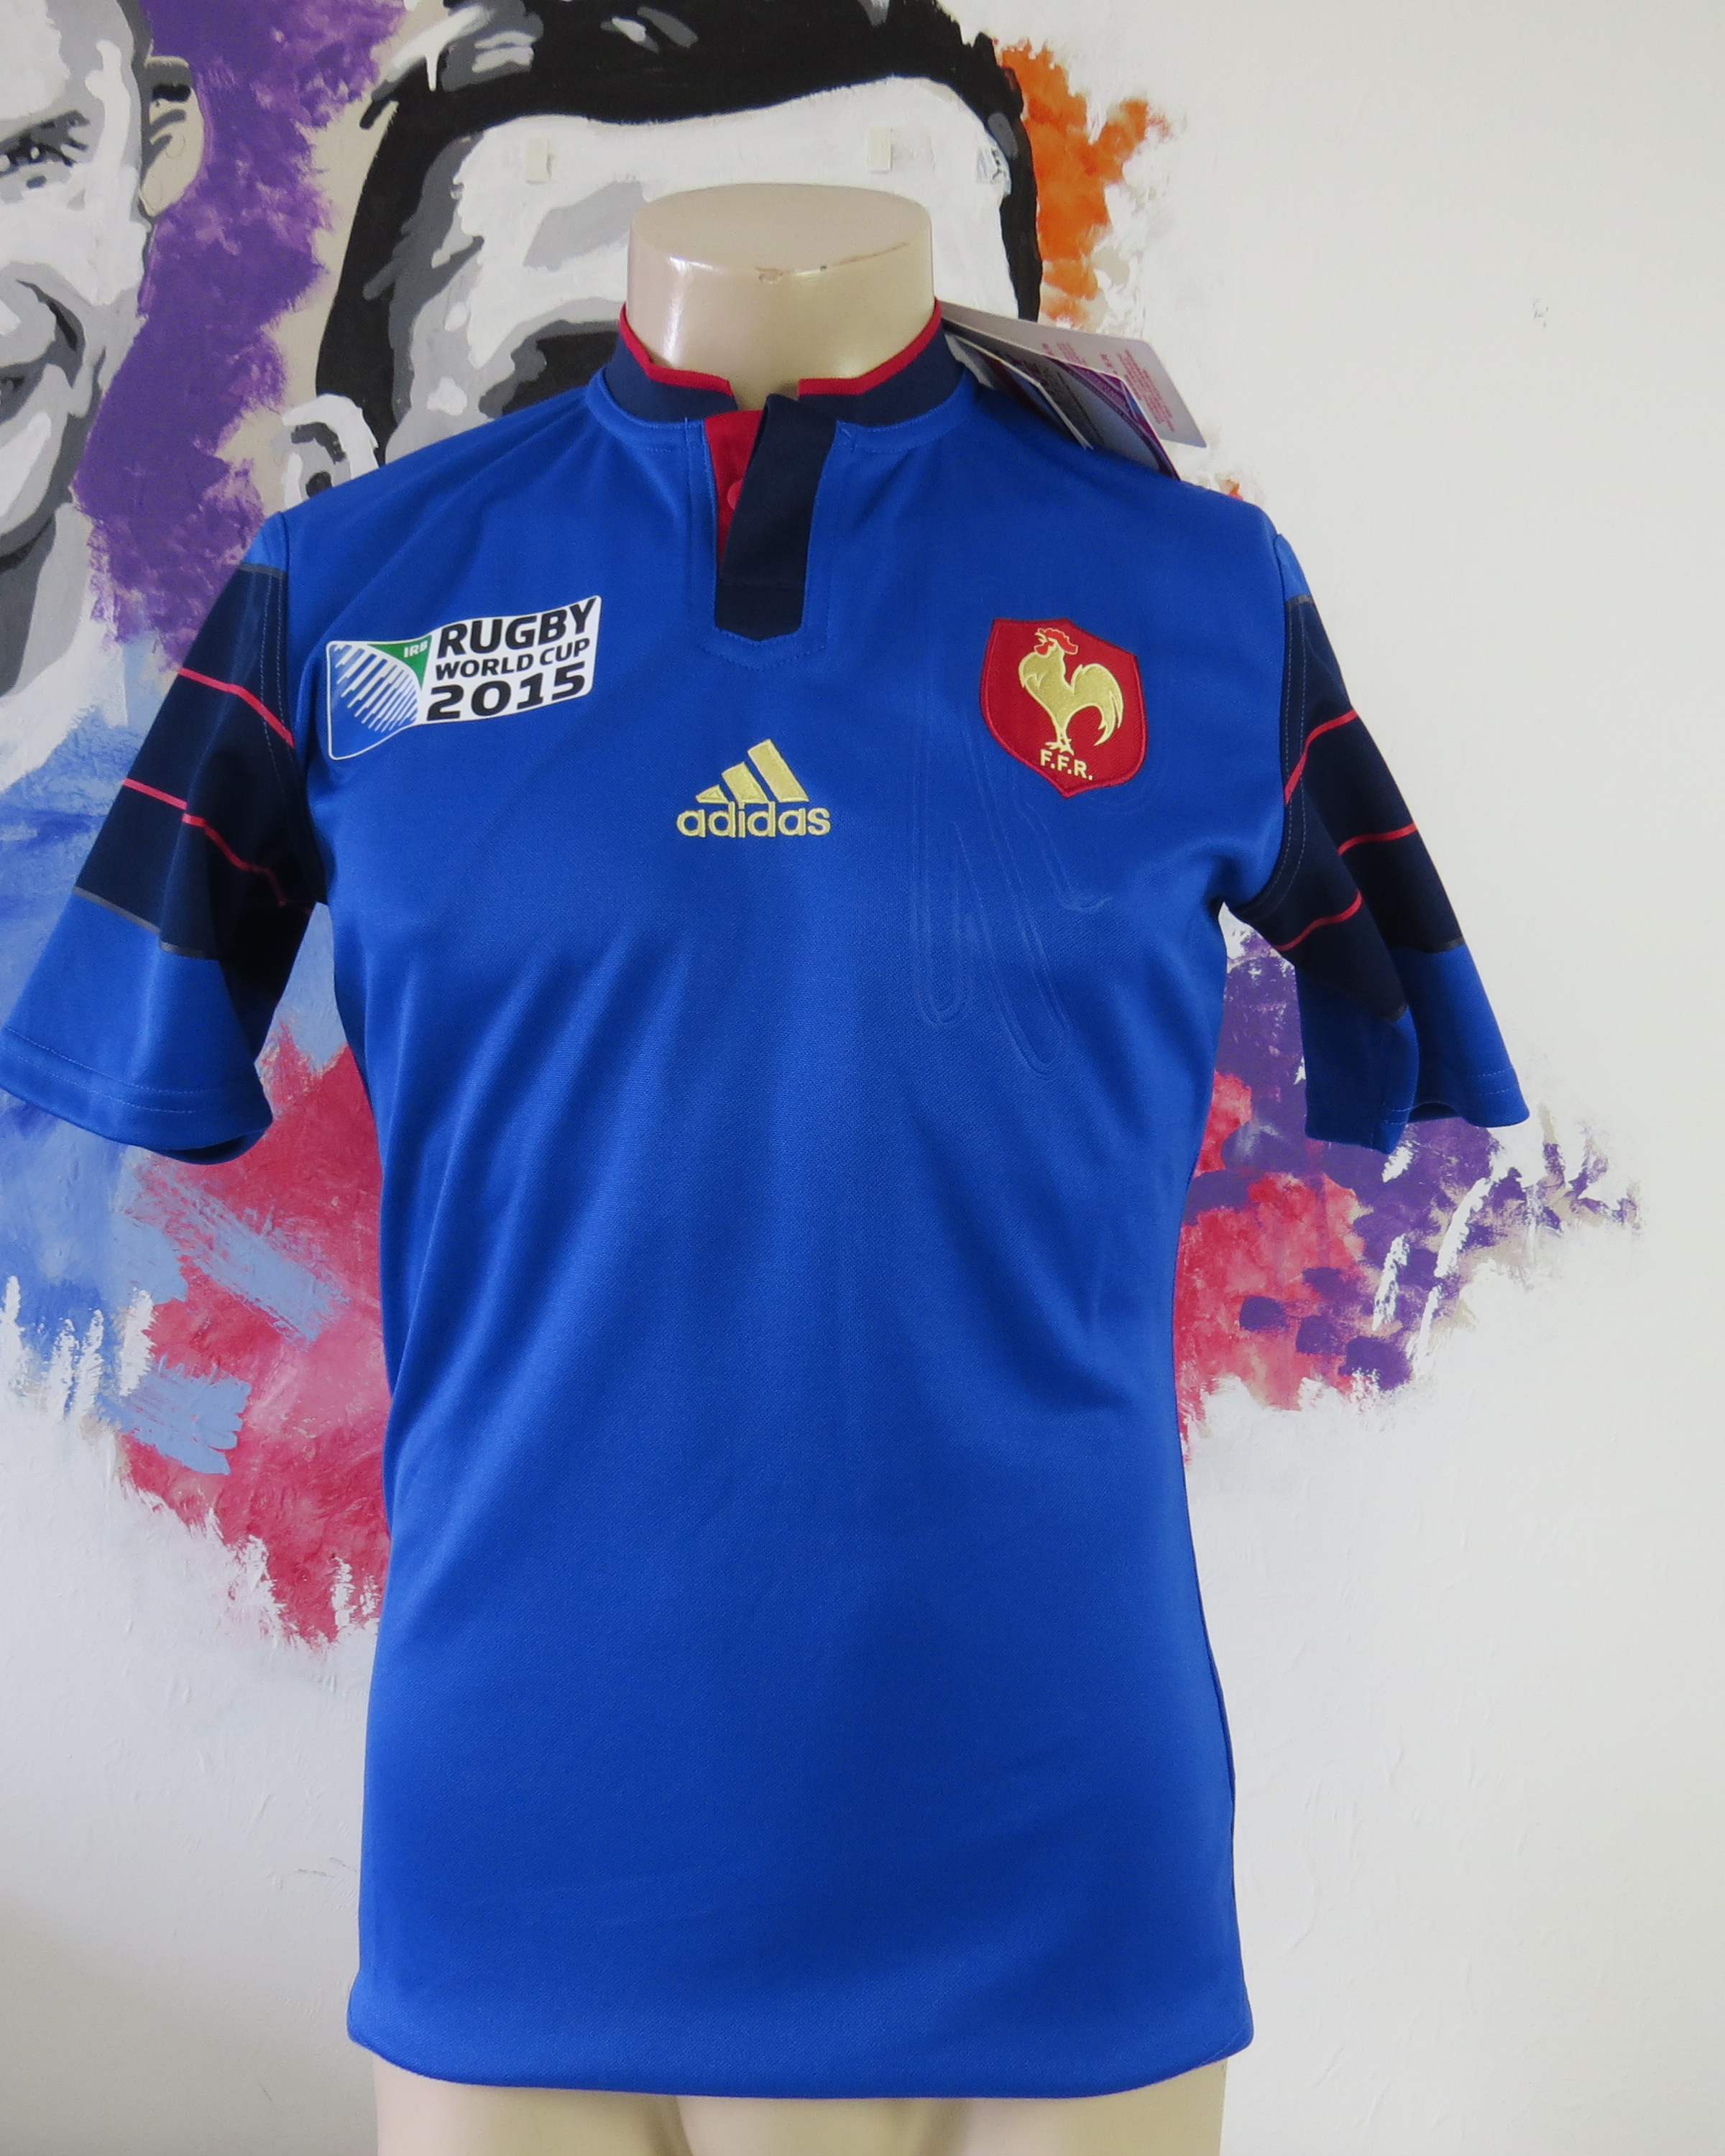 France Rugby World Cup 2015 home shirt adidas Jersey Maillot Size S *BNWT*